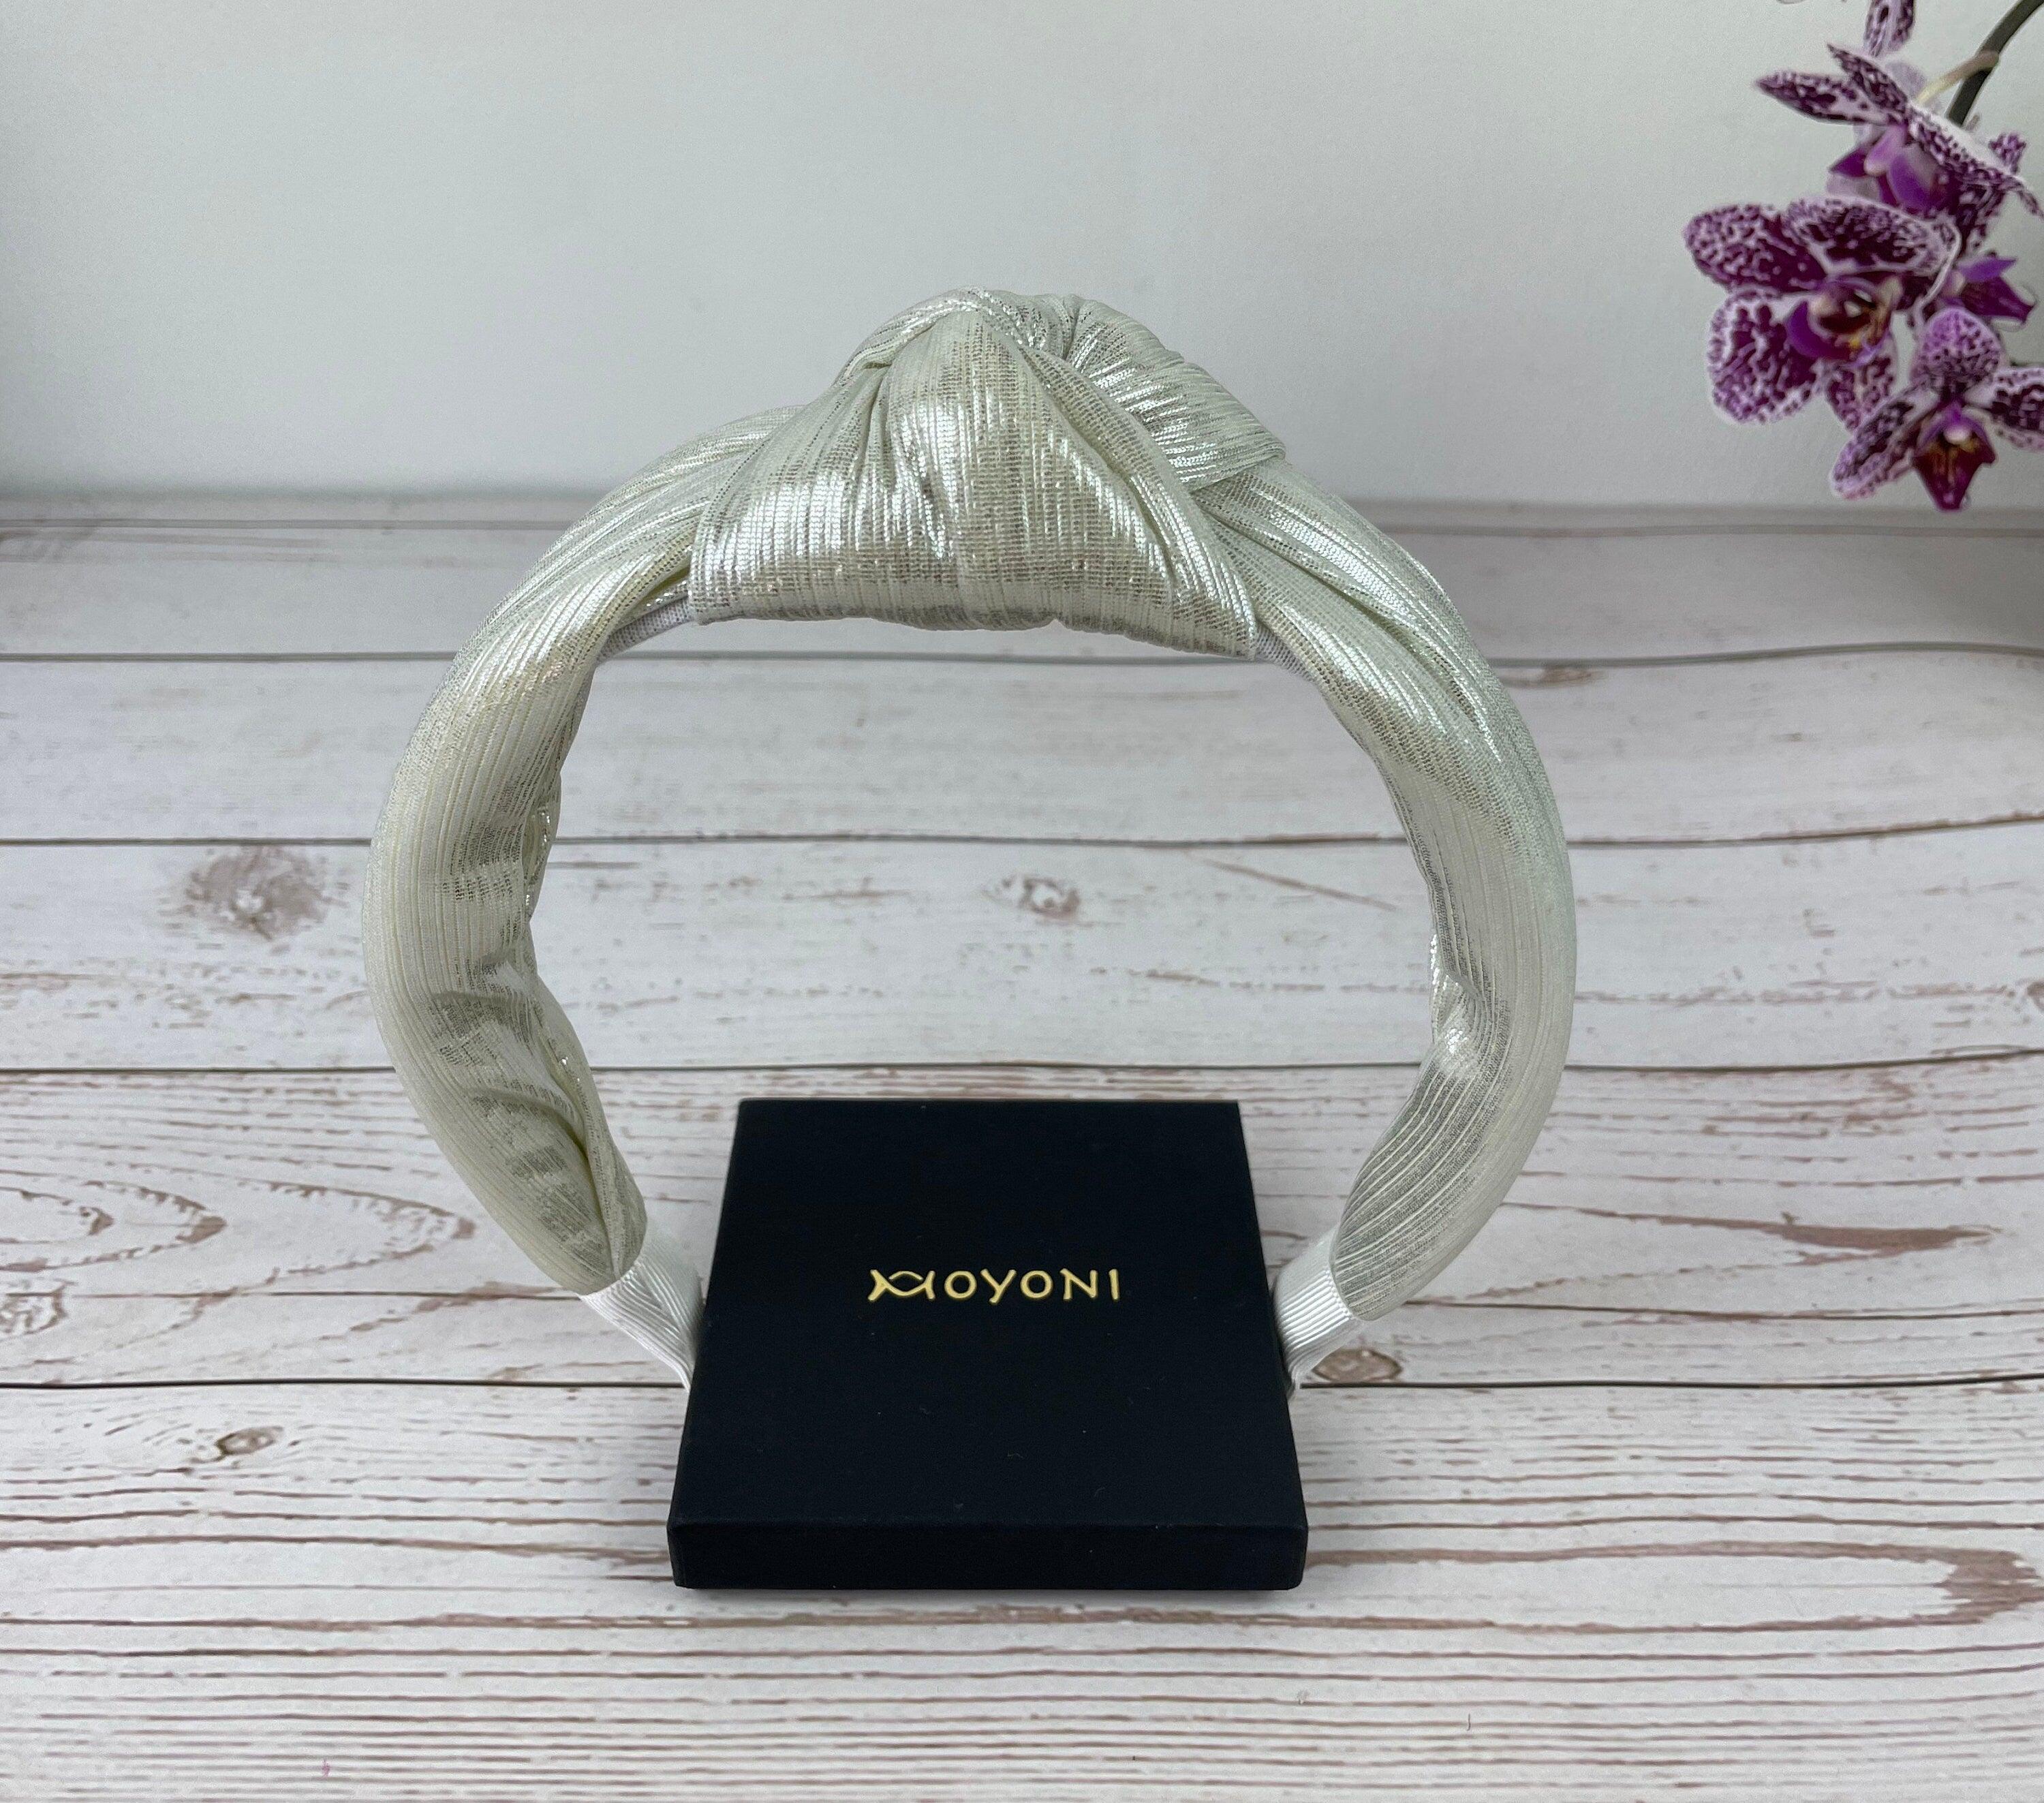 High-Quality Off-White Shiny Jersey Fabric Headband - Elegant Hair Accessory for Women, Ideal for Weddings and Celebrations available at Moyoni Design